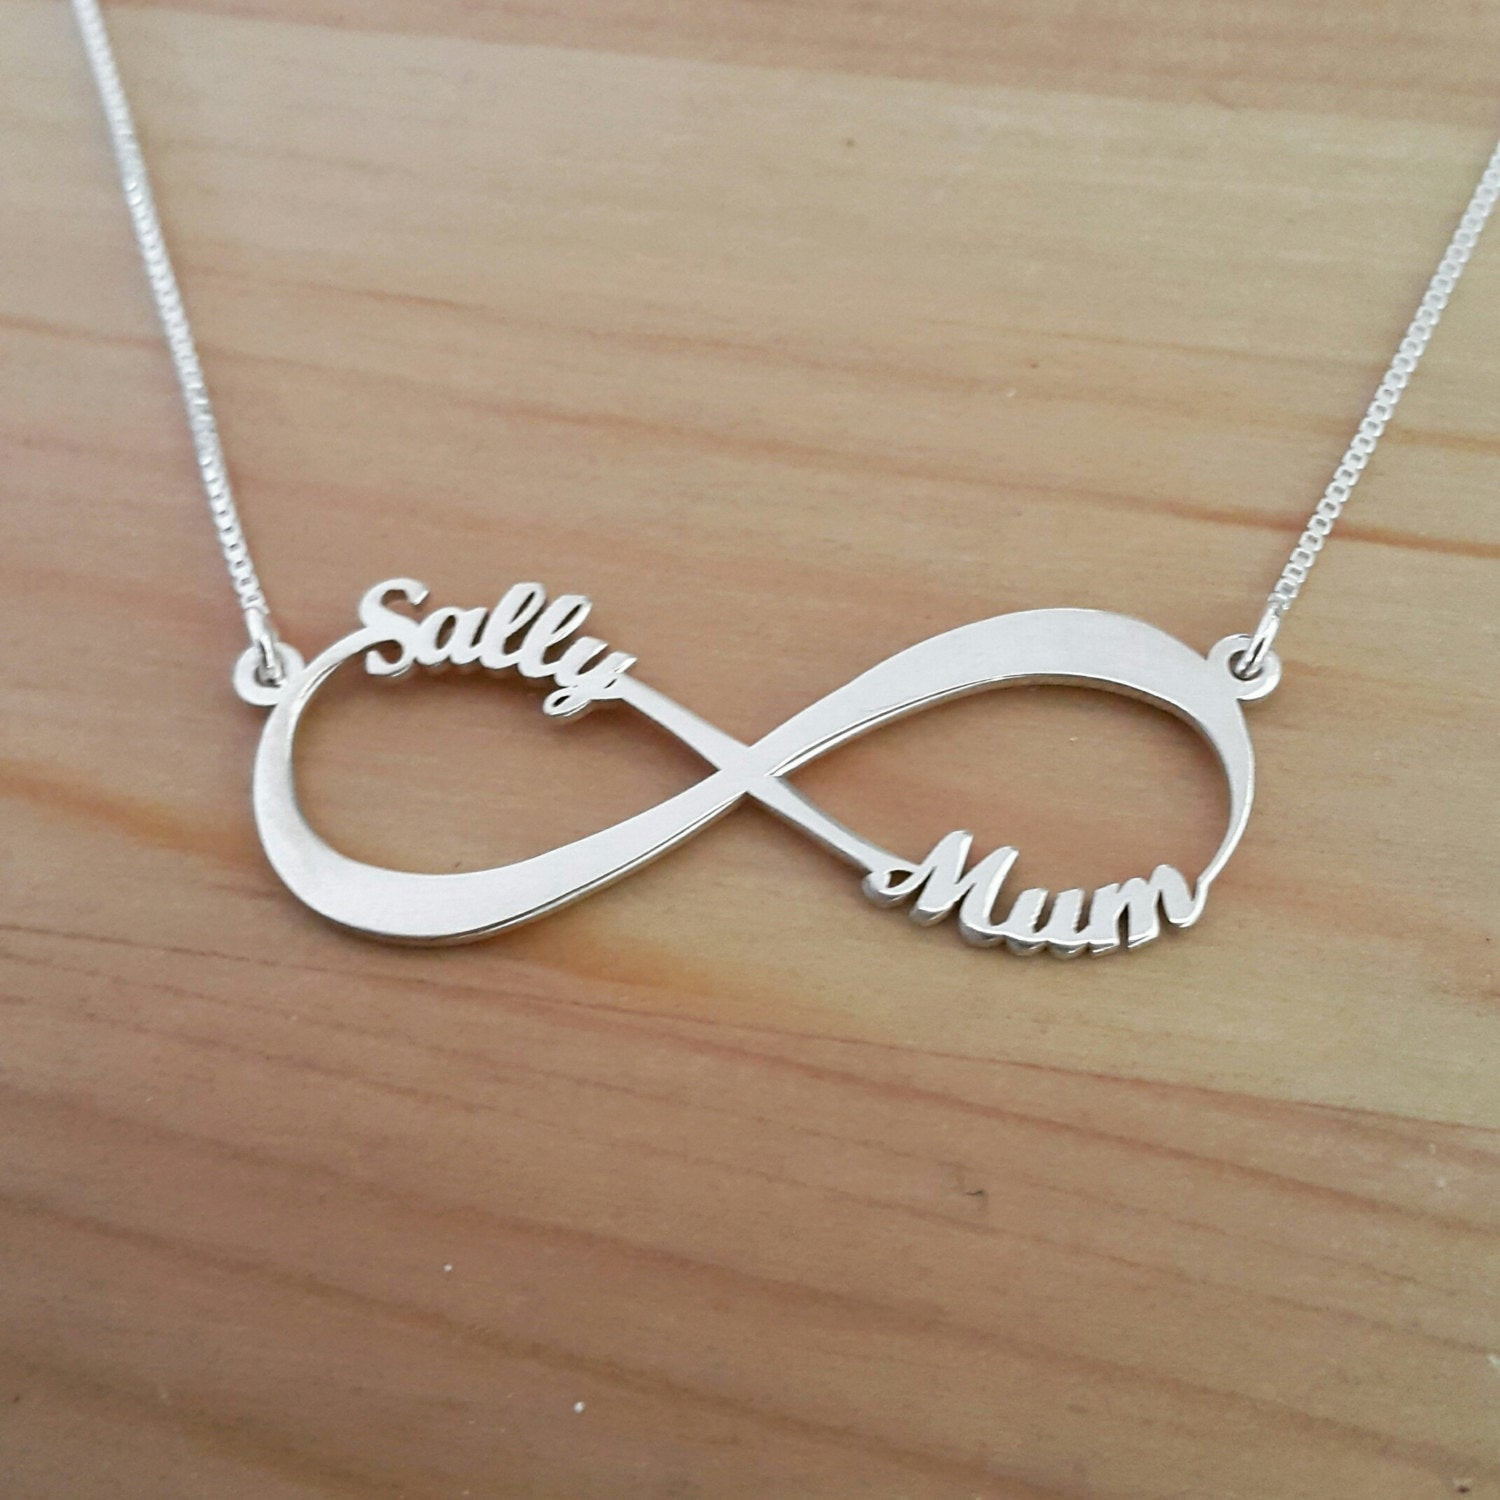 Silver Name Necklace
 2 Name Silver Infinity Necklace Silver Infinity name necklace